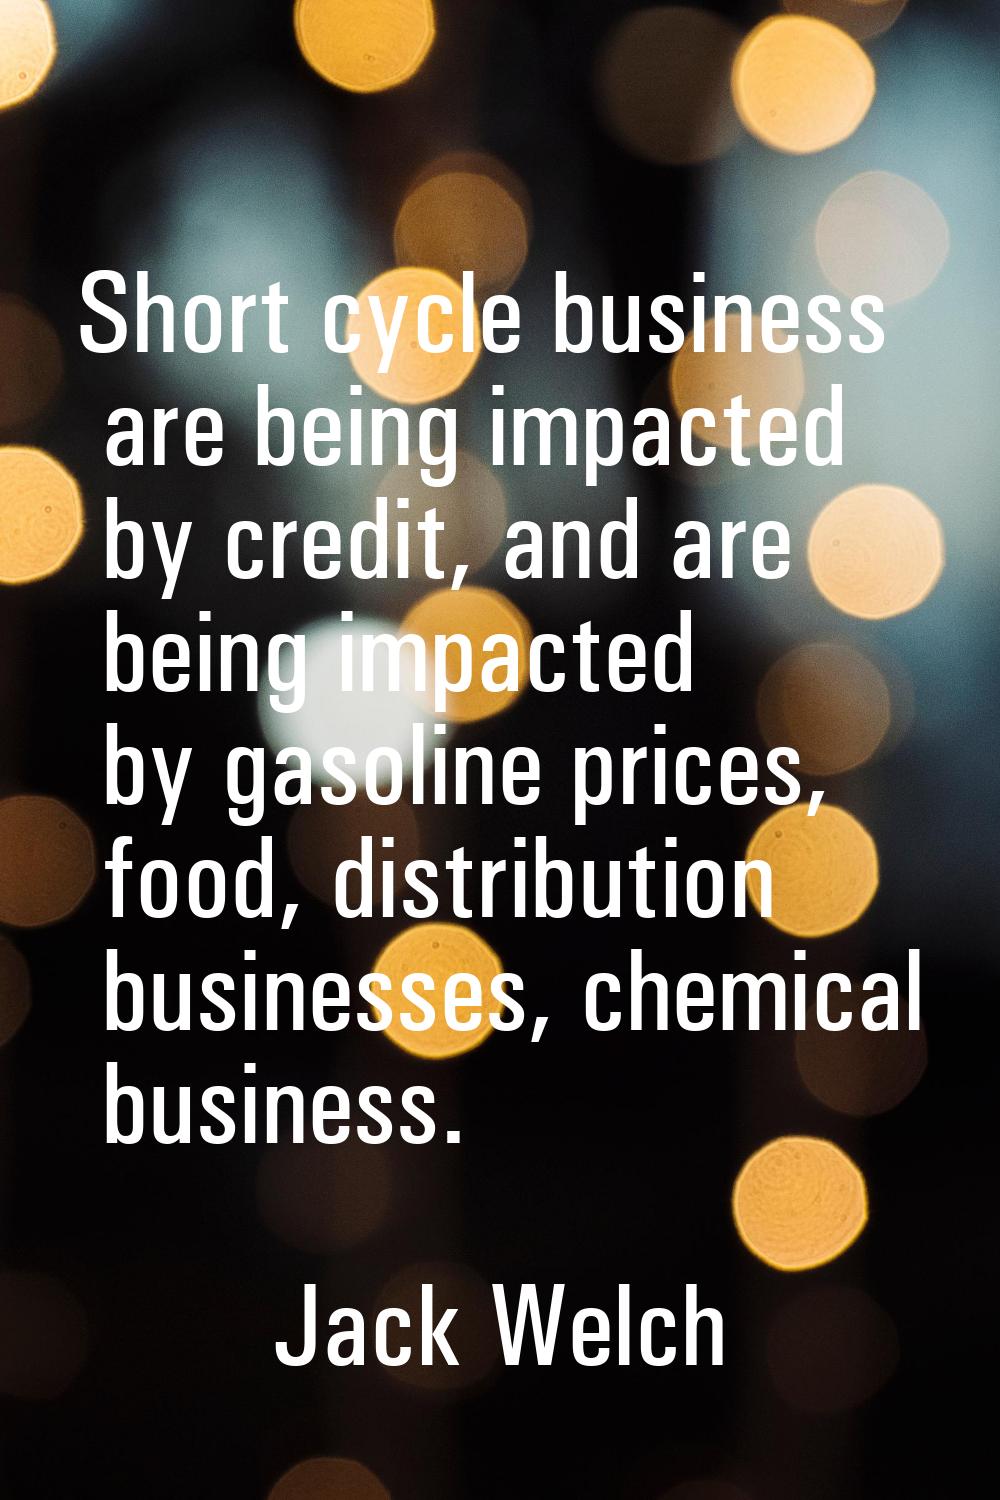 Short cycle business are being impacted by credit, and are being impacted by gasoline prices, food,